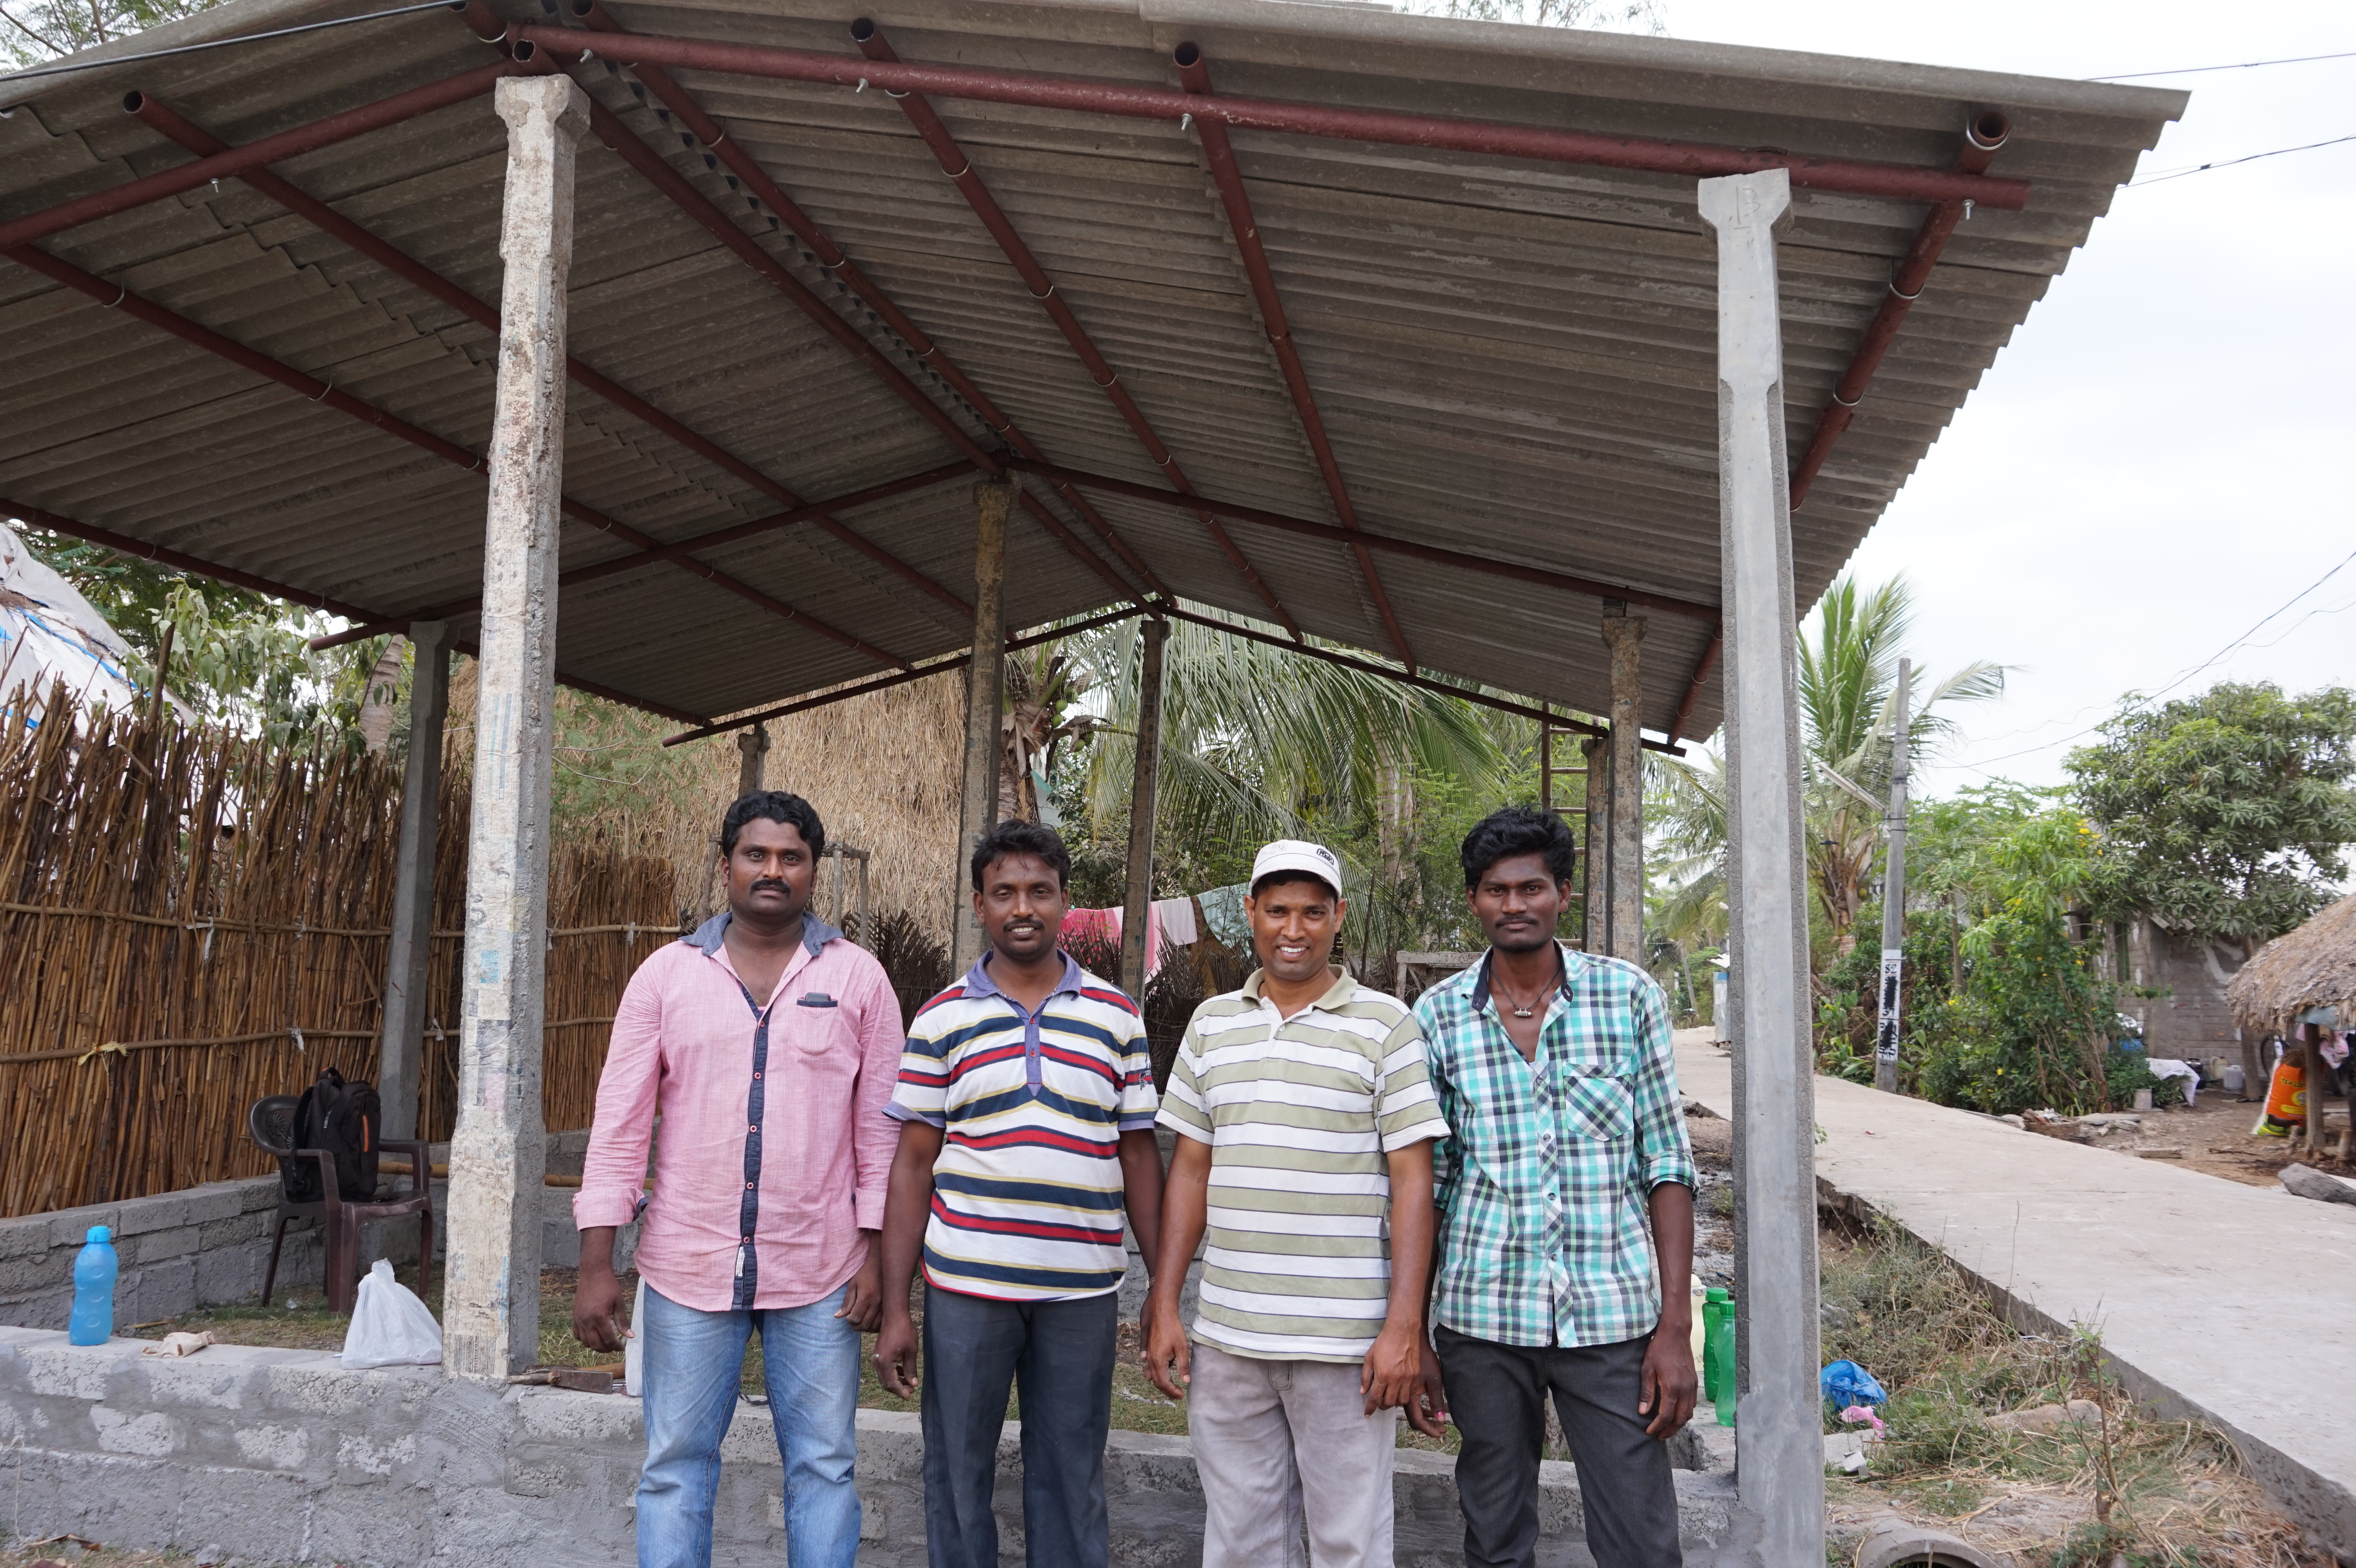 Pr Joseph (second from left) stands with Narishimama, Nayadu and Suresh in front of the prayer hall